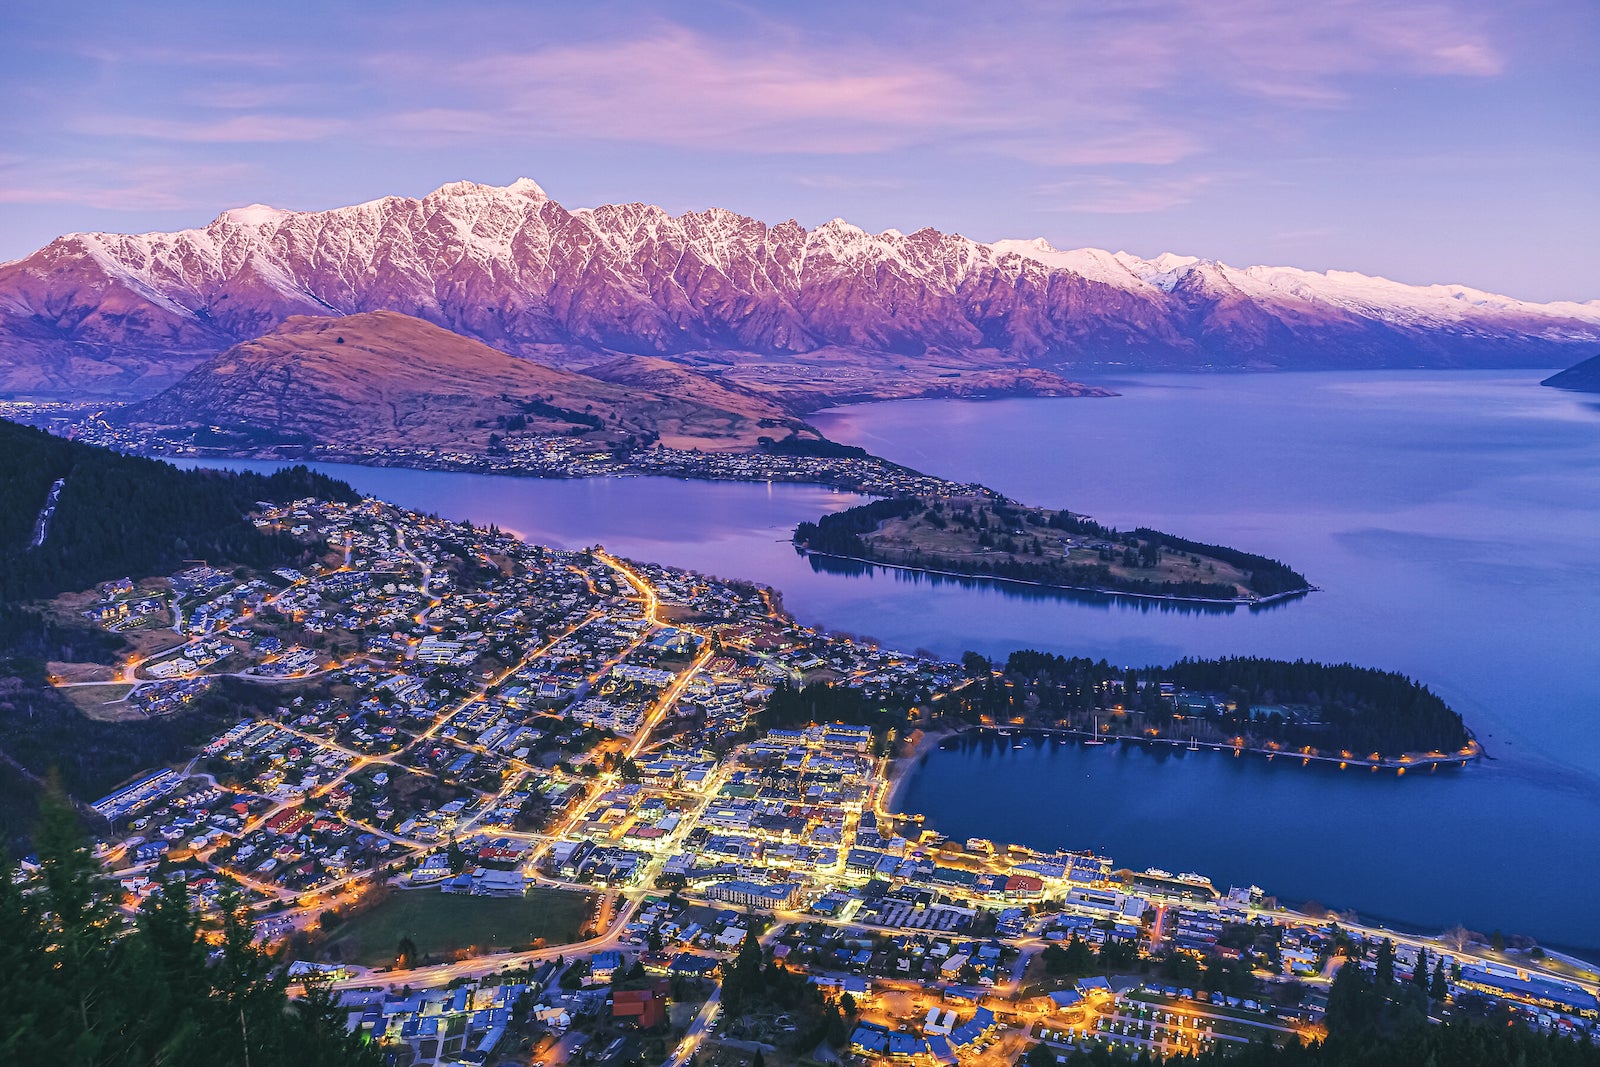 New resorts to take a look at when New Zealand reopens